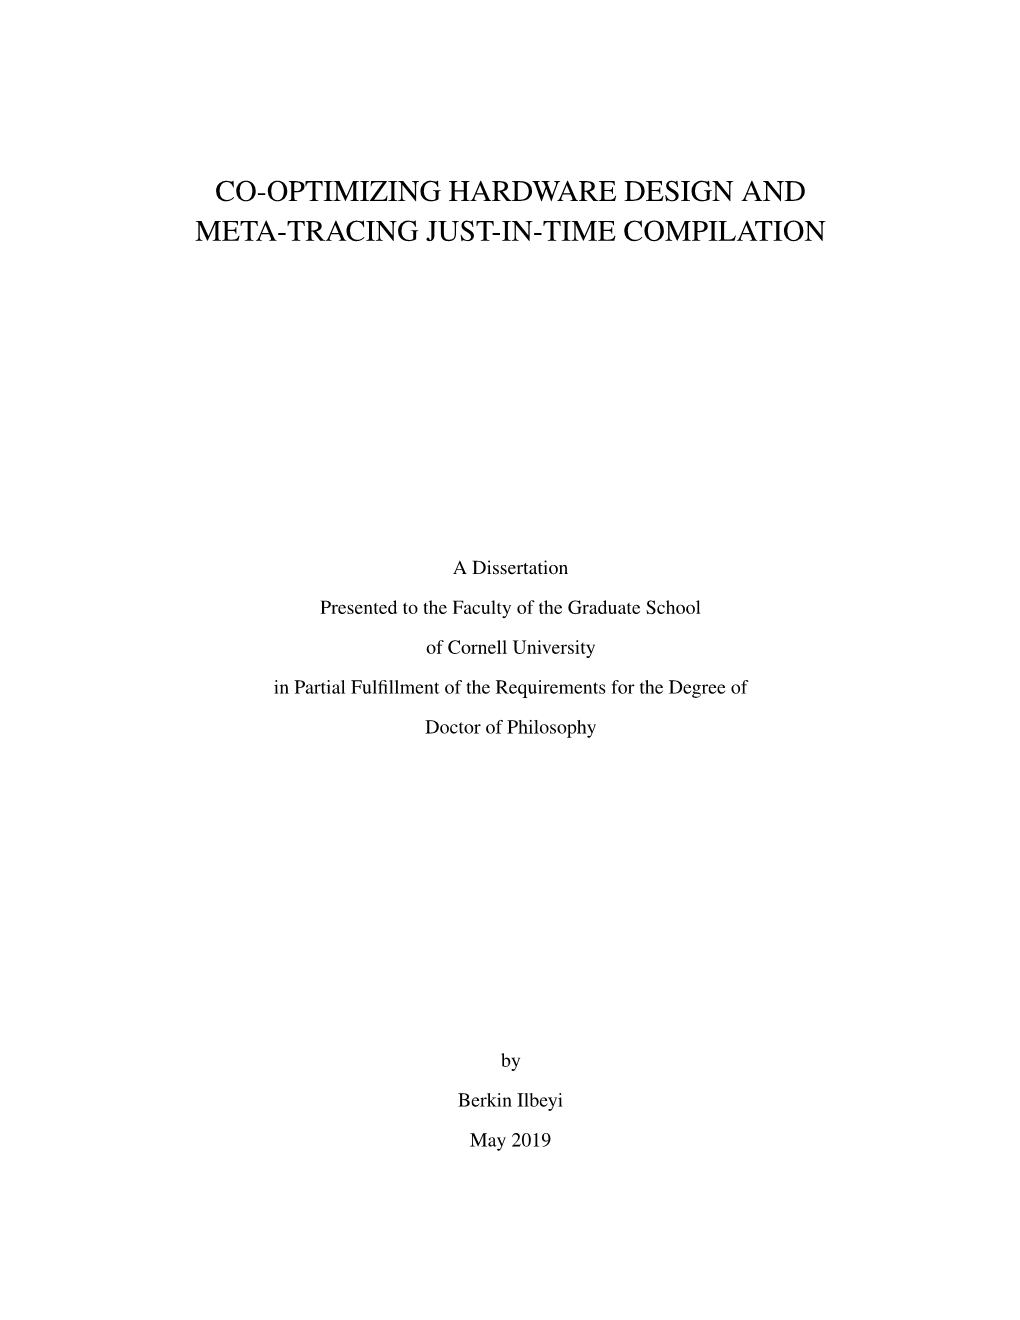 Co-Optimizing Hardware Design and Meta-Tracing Just-In-Time Compilation